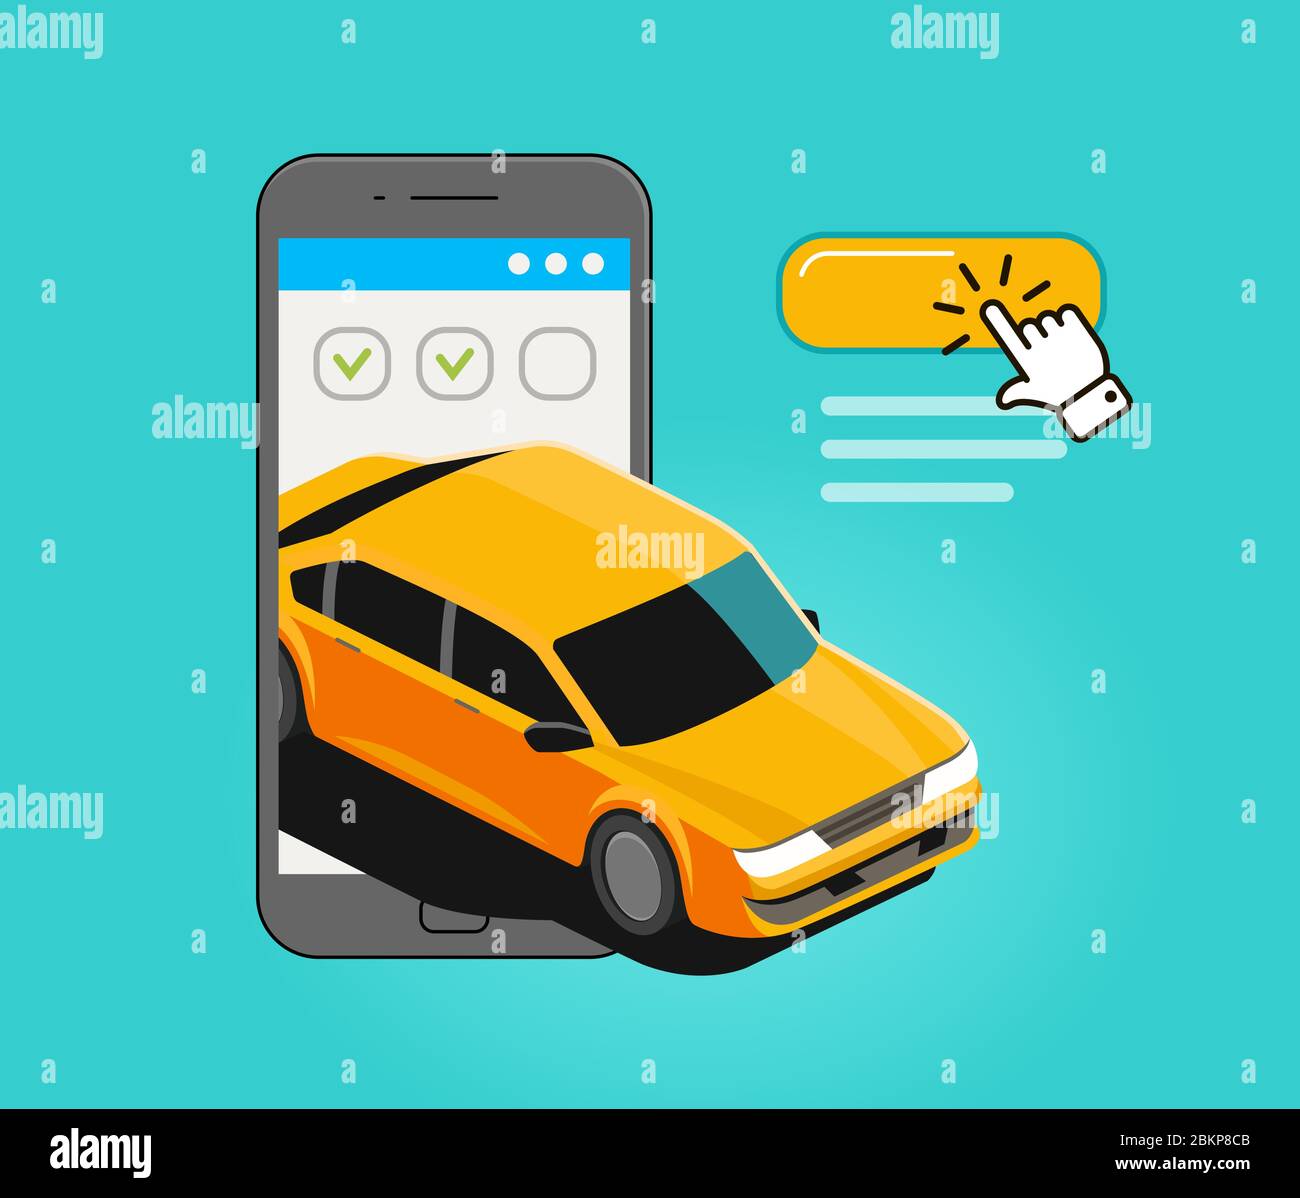 Taxi call using mobile application. Commercial transportation vector Stock Vector